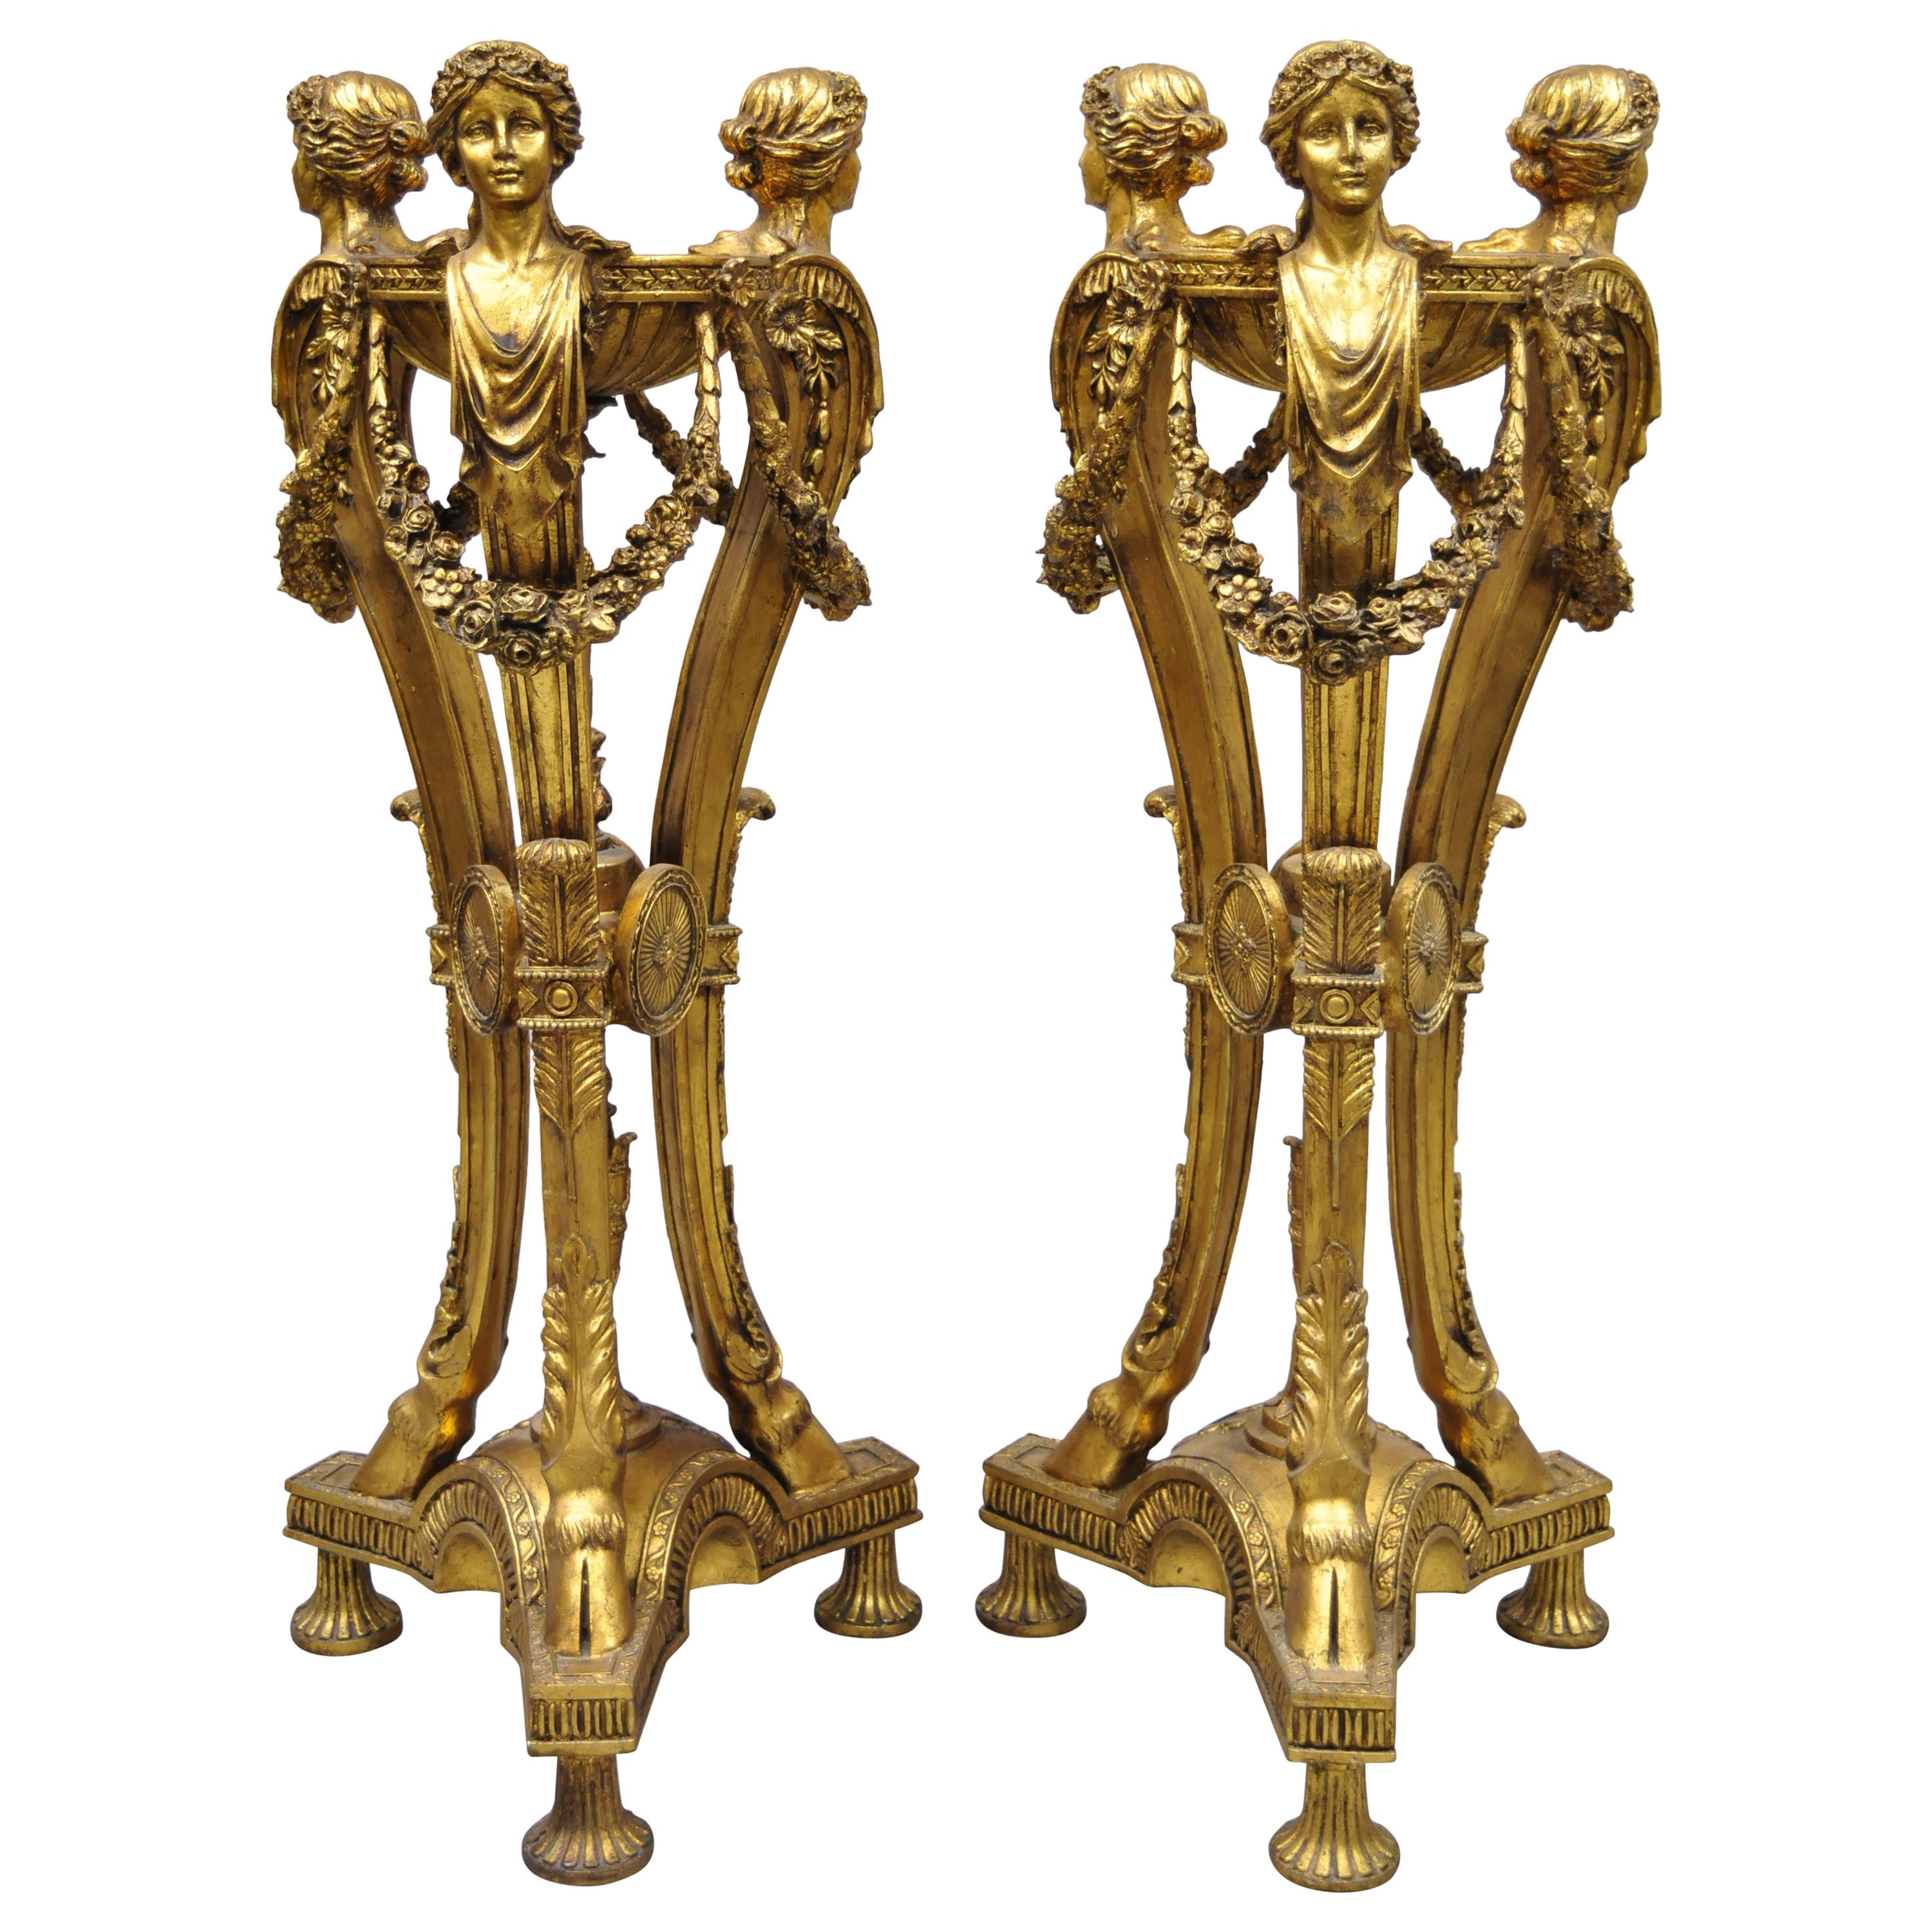 Pair of Gold French Neoclassical Style Figural Maiden Bust Hoof Foot Pedestals